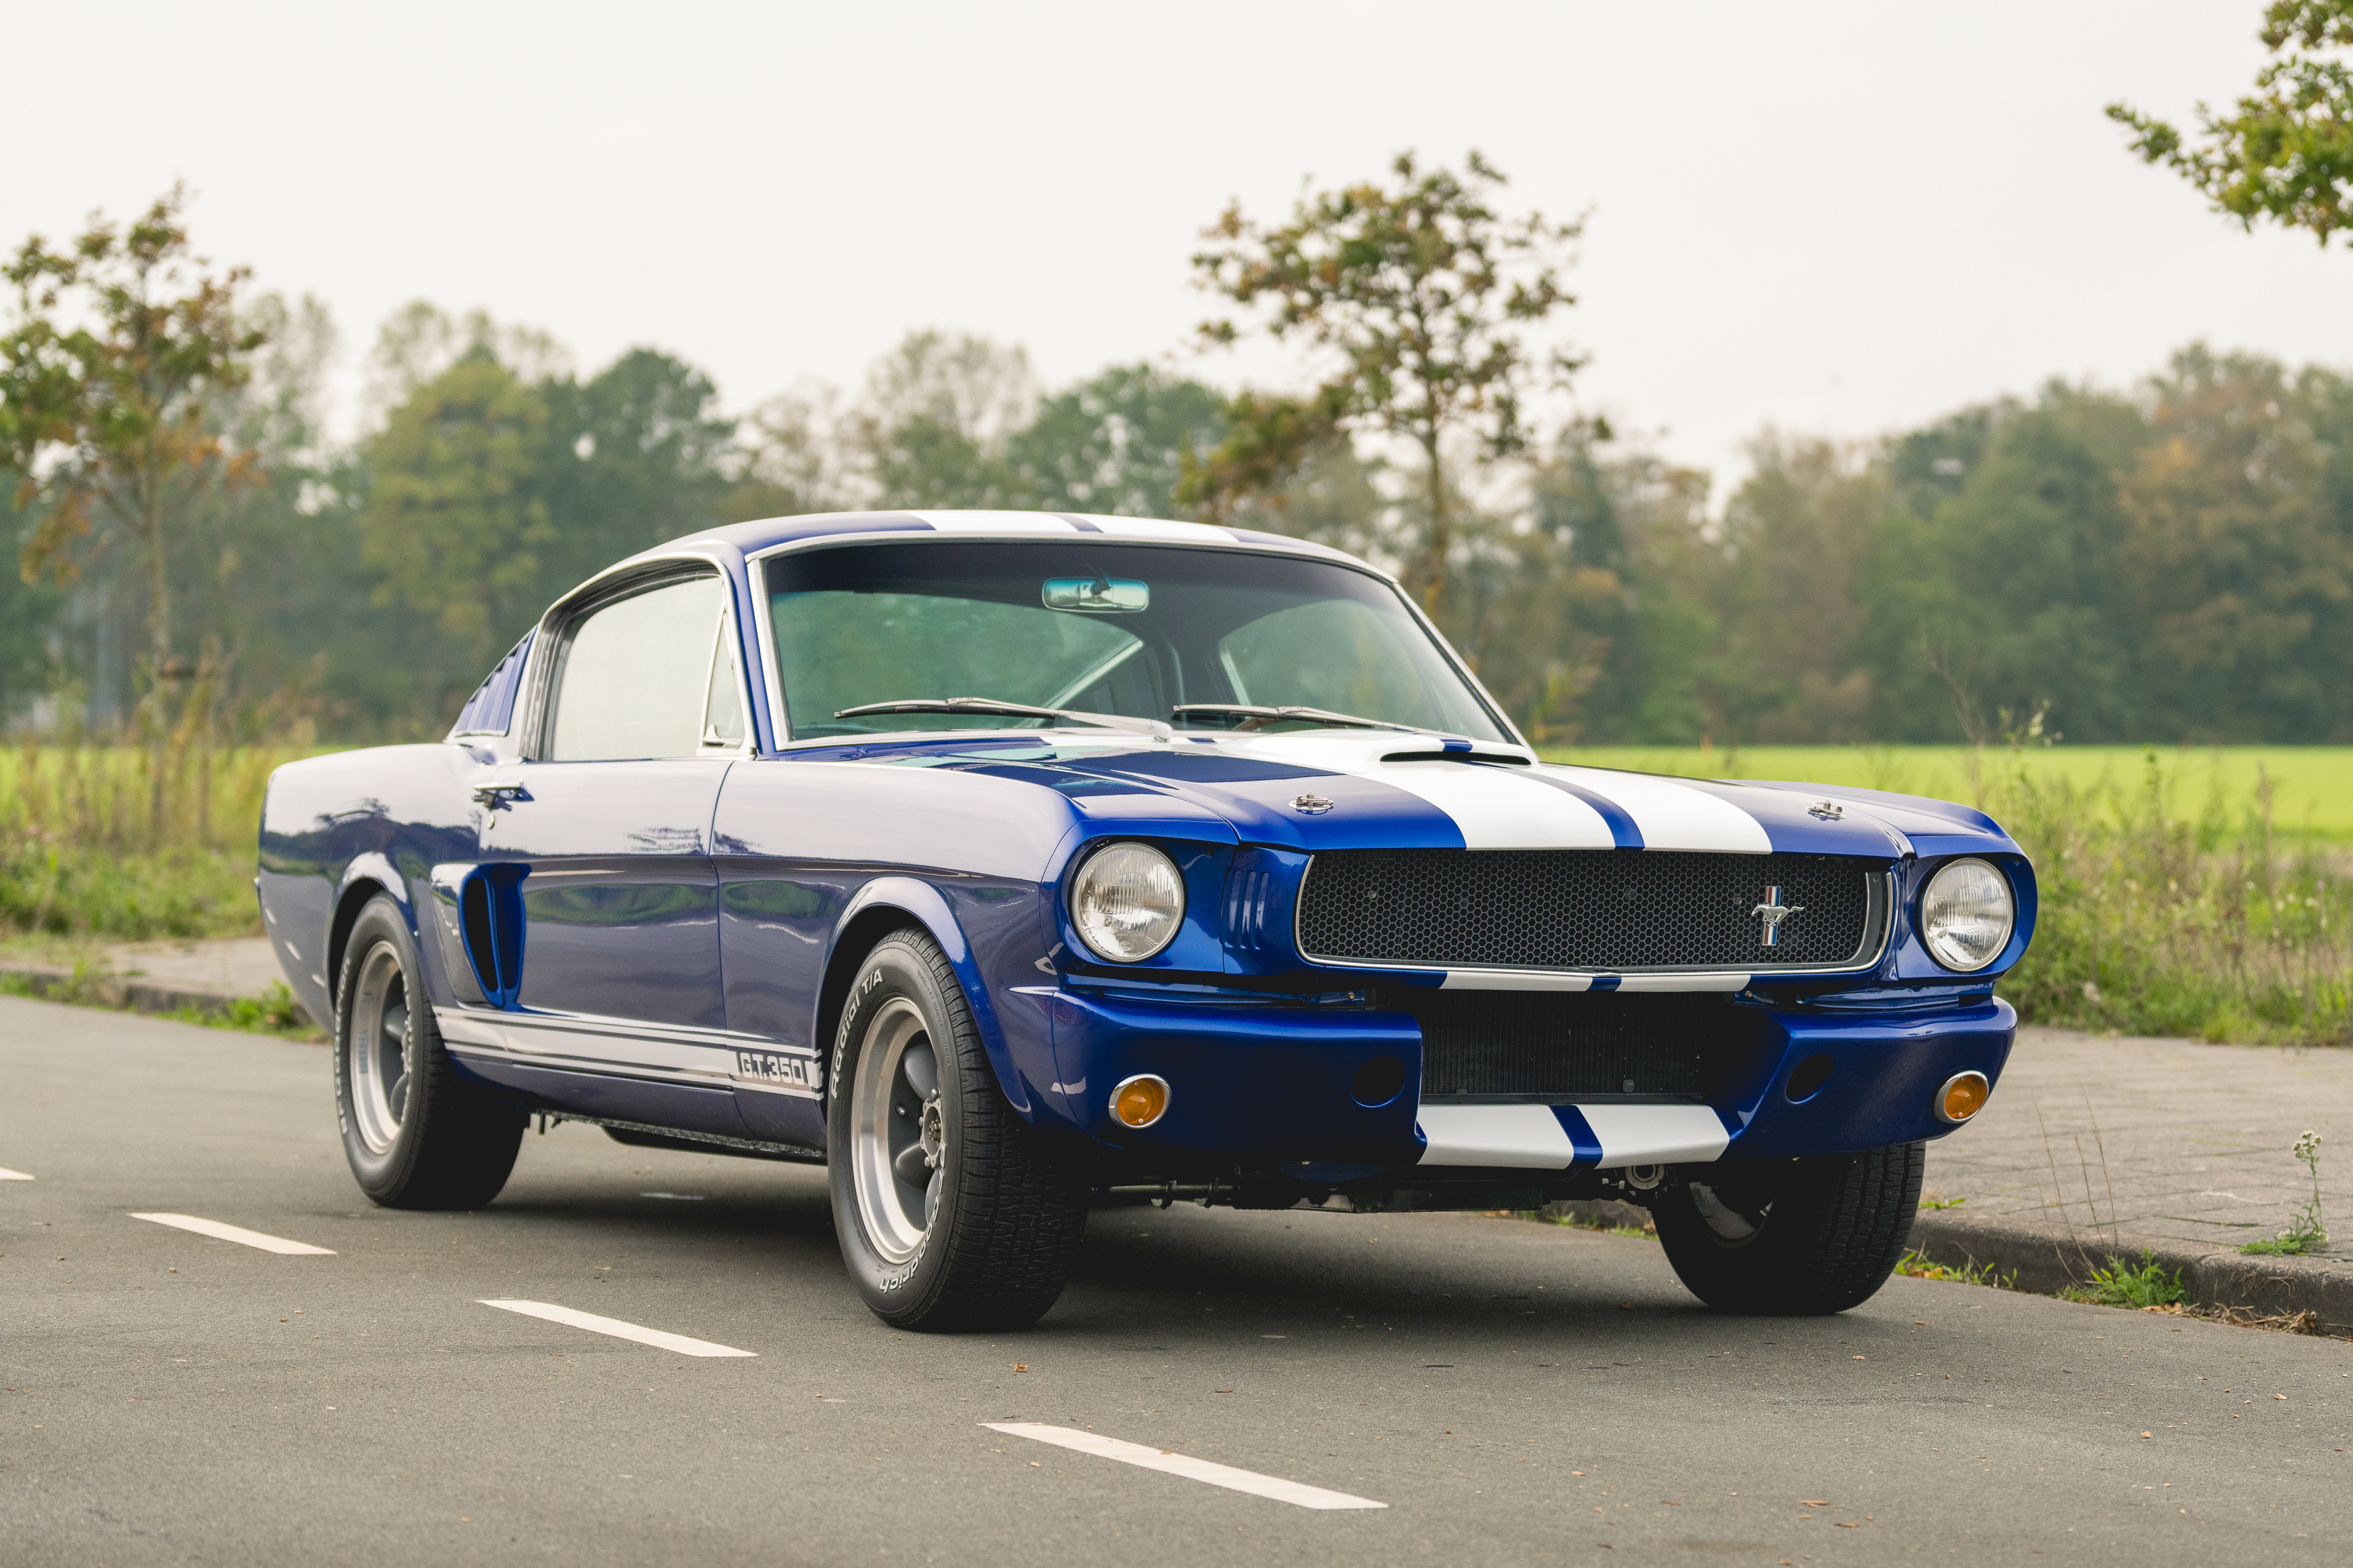 1965 Ford Mustang Fastback - GT350R Tribute for sale by auction in